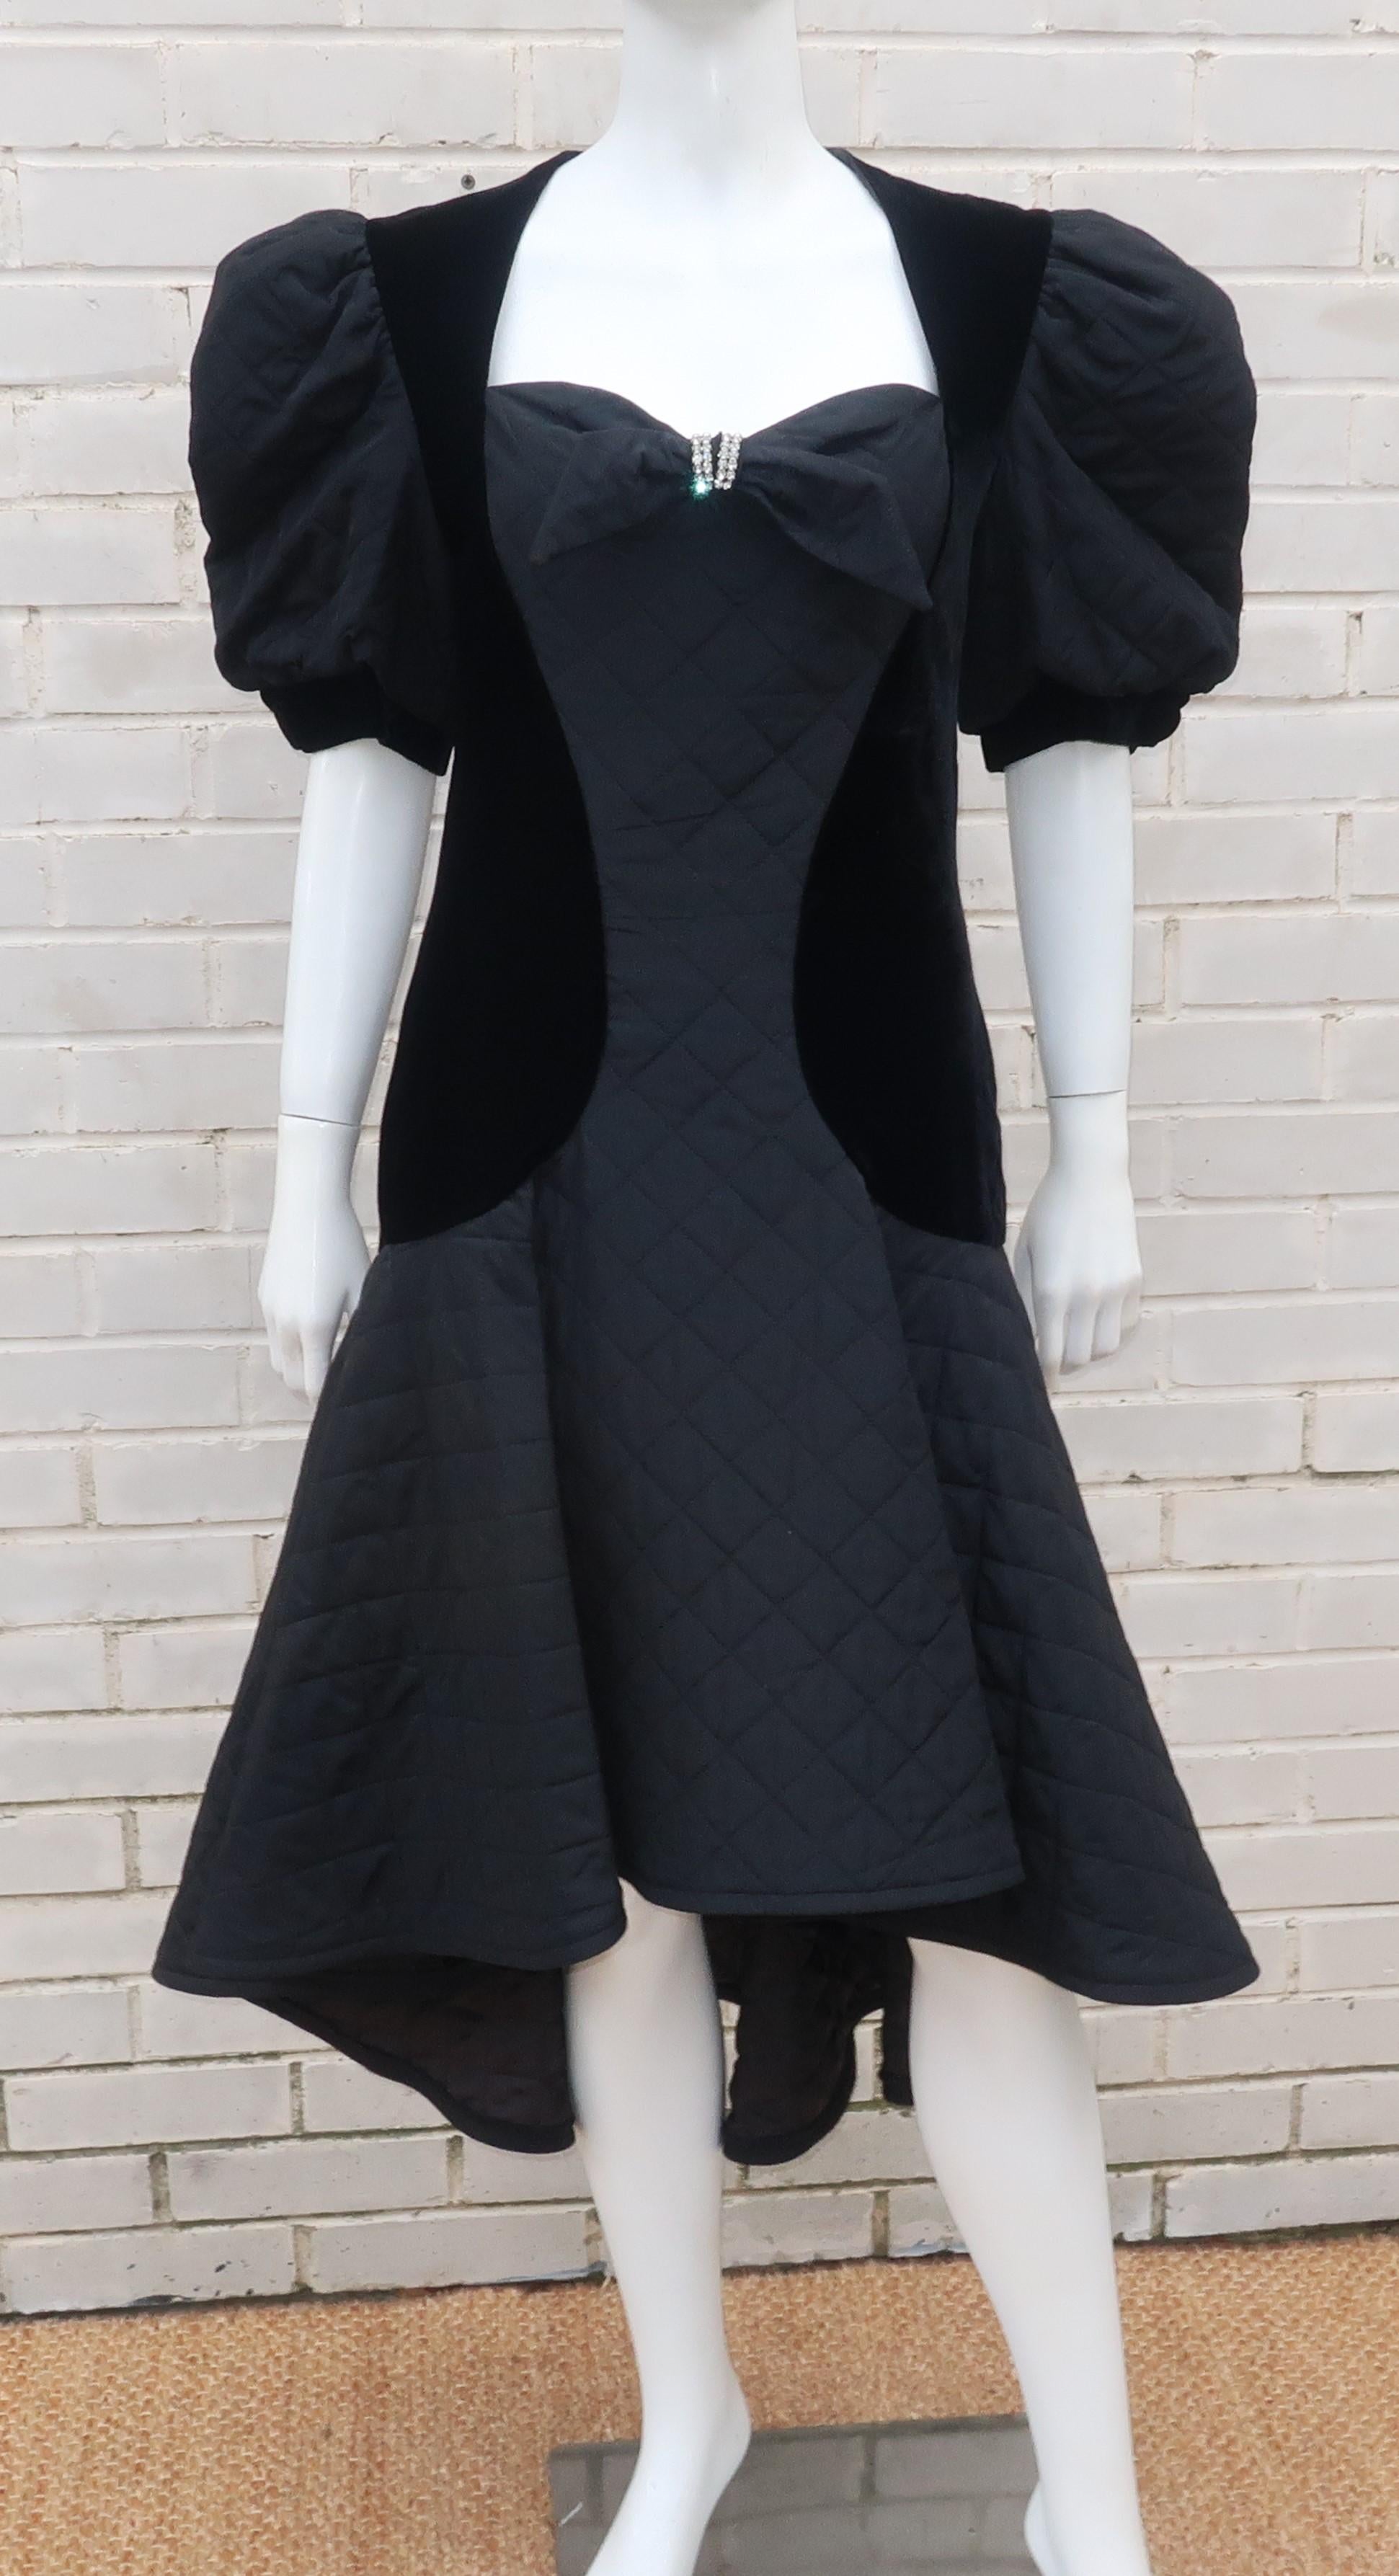 Maryandre Couture of Paris black quilted cocktail dress with velvet side panels, high-low hemline and a rhinestone embellished bow at the bodice.  The 1980's design has a coquettish 1930's aesthetic with a heart shaped neckline and puffed sleeves. 